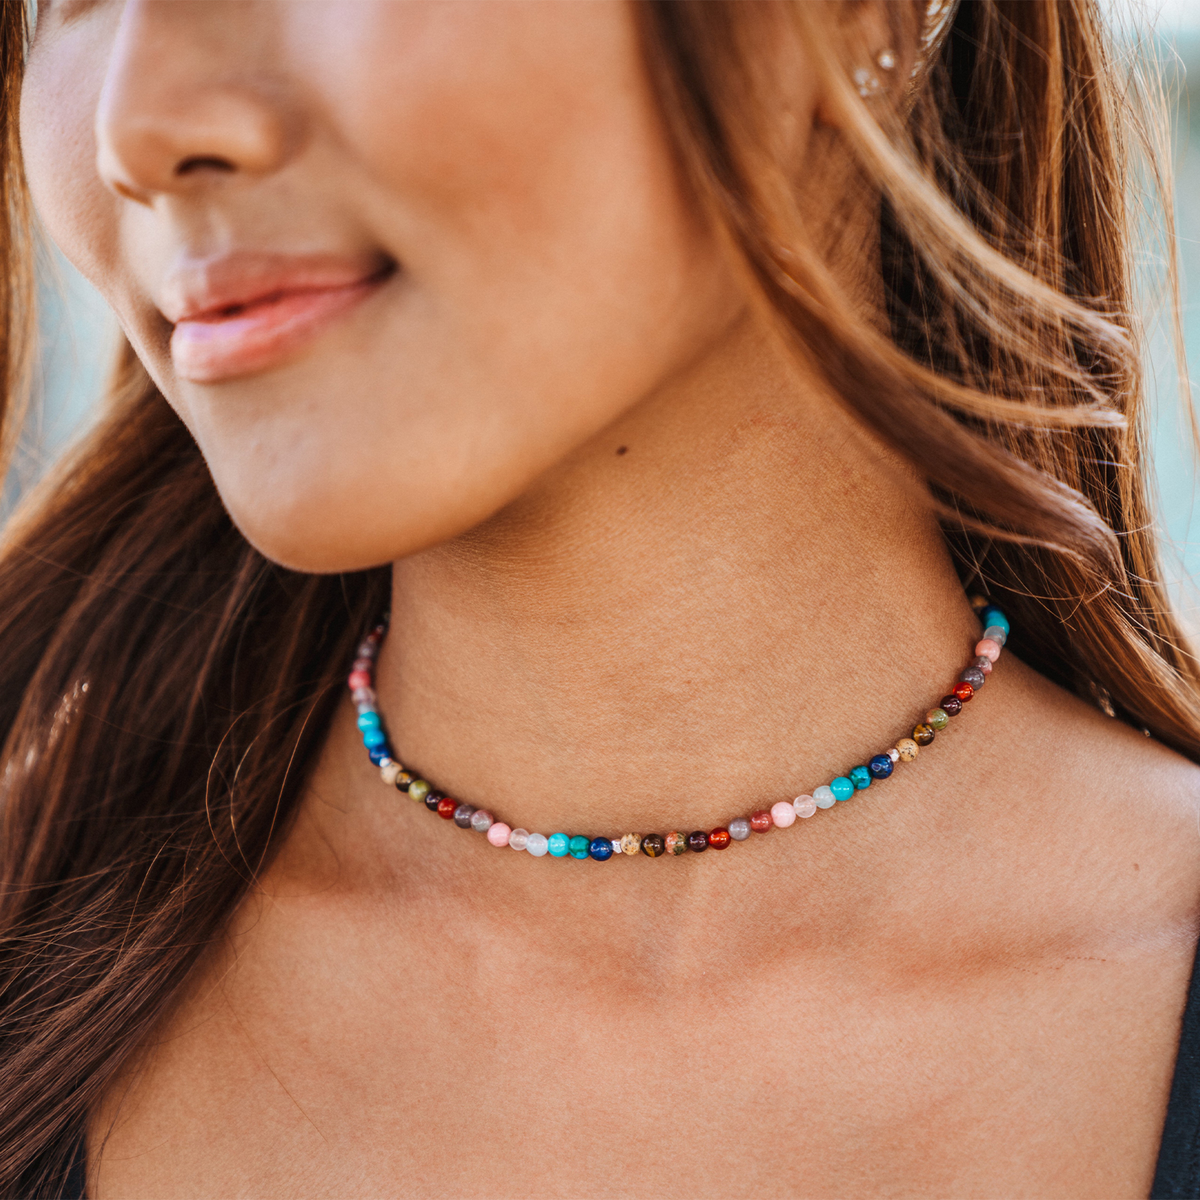 Model wearing 4mm multicolor stone healing necklace